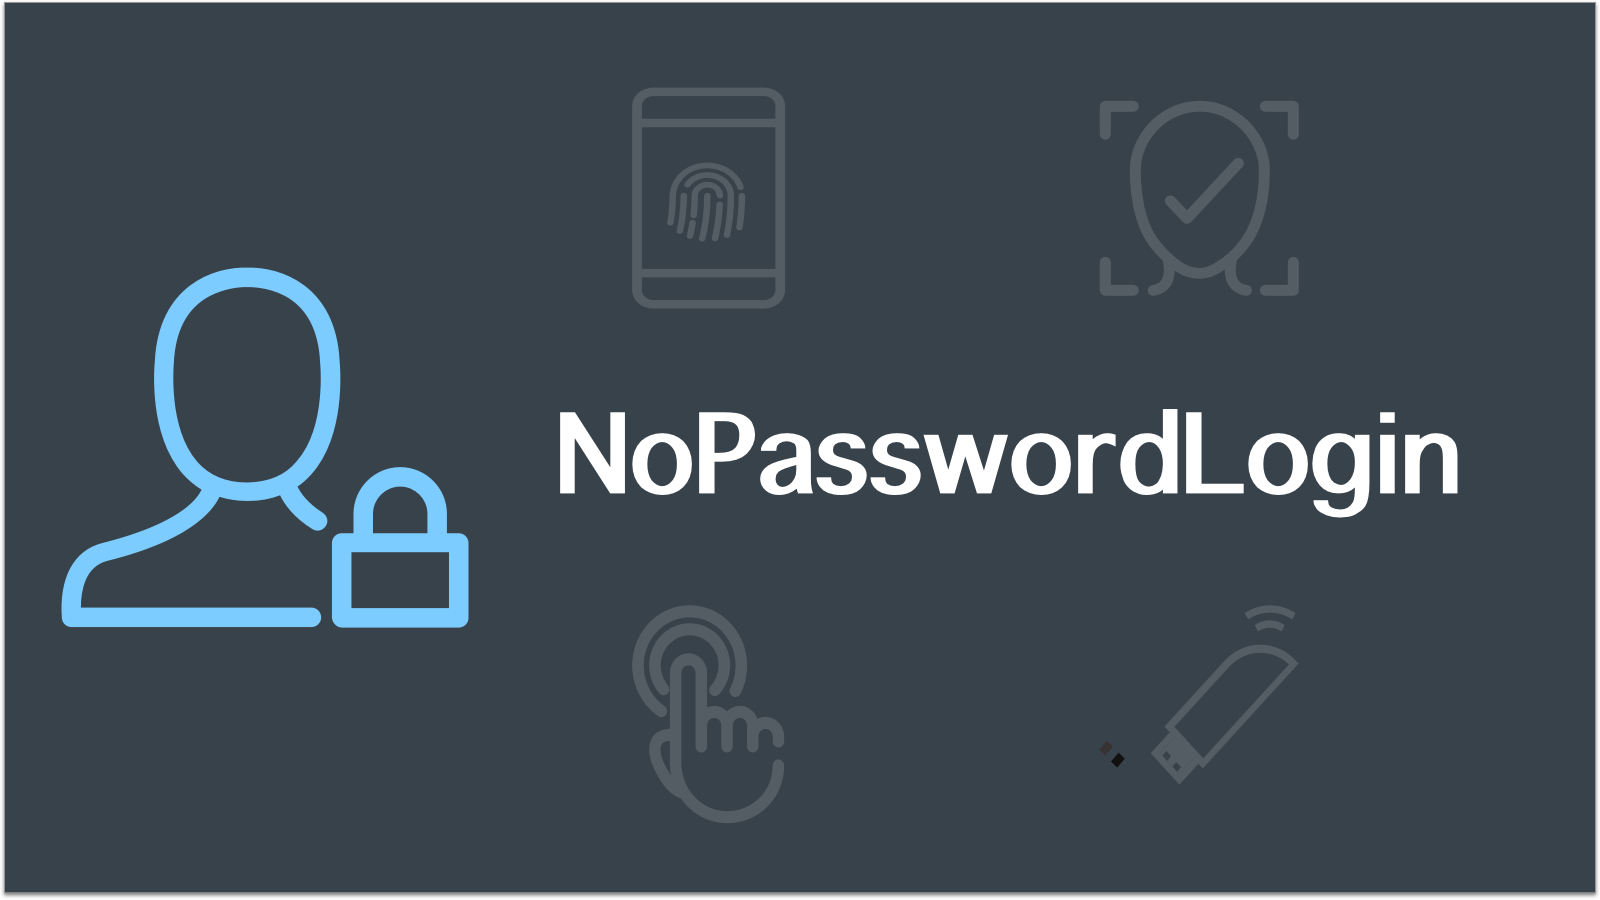 you cannot setup passwordless phone sign in